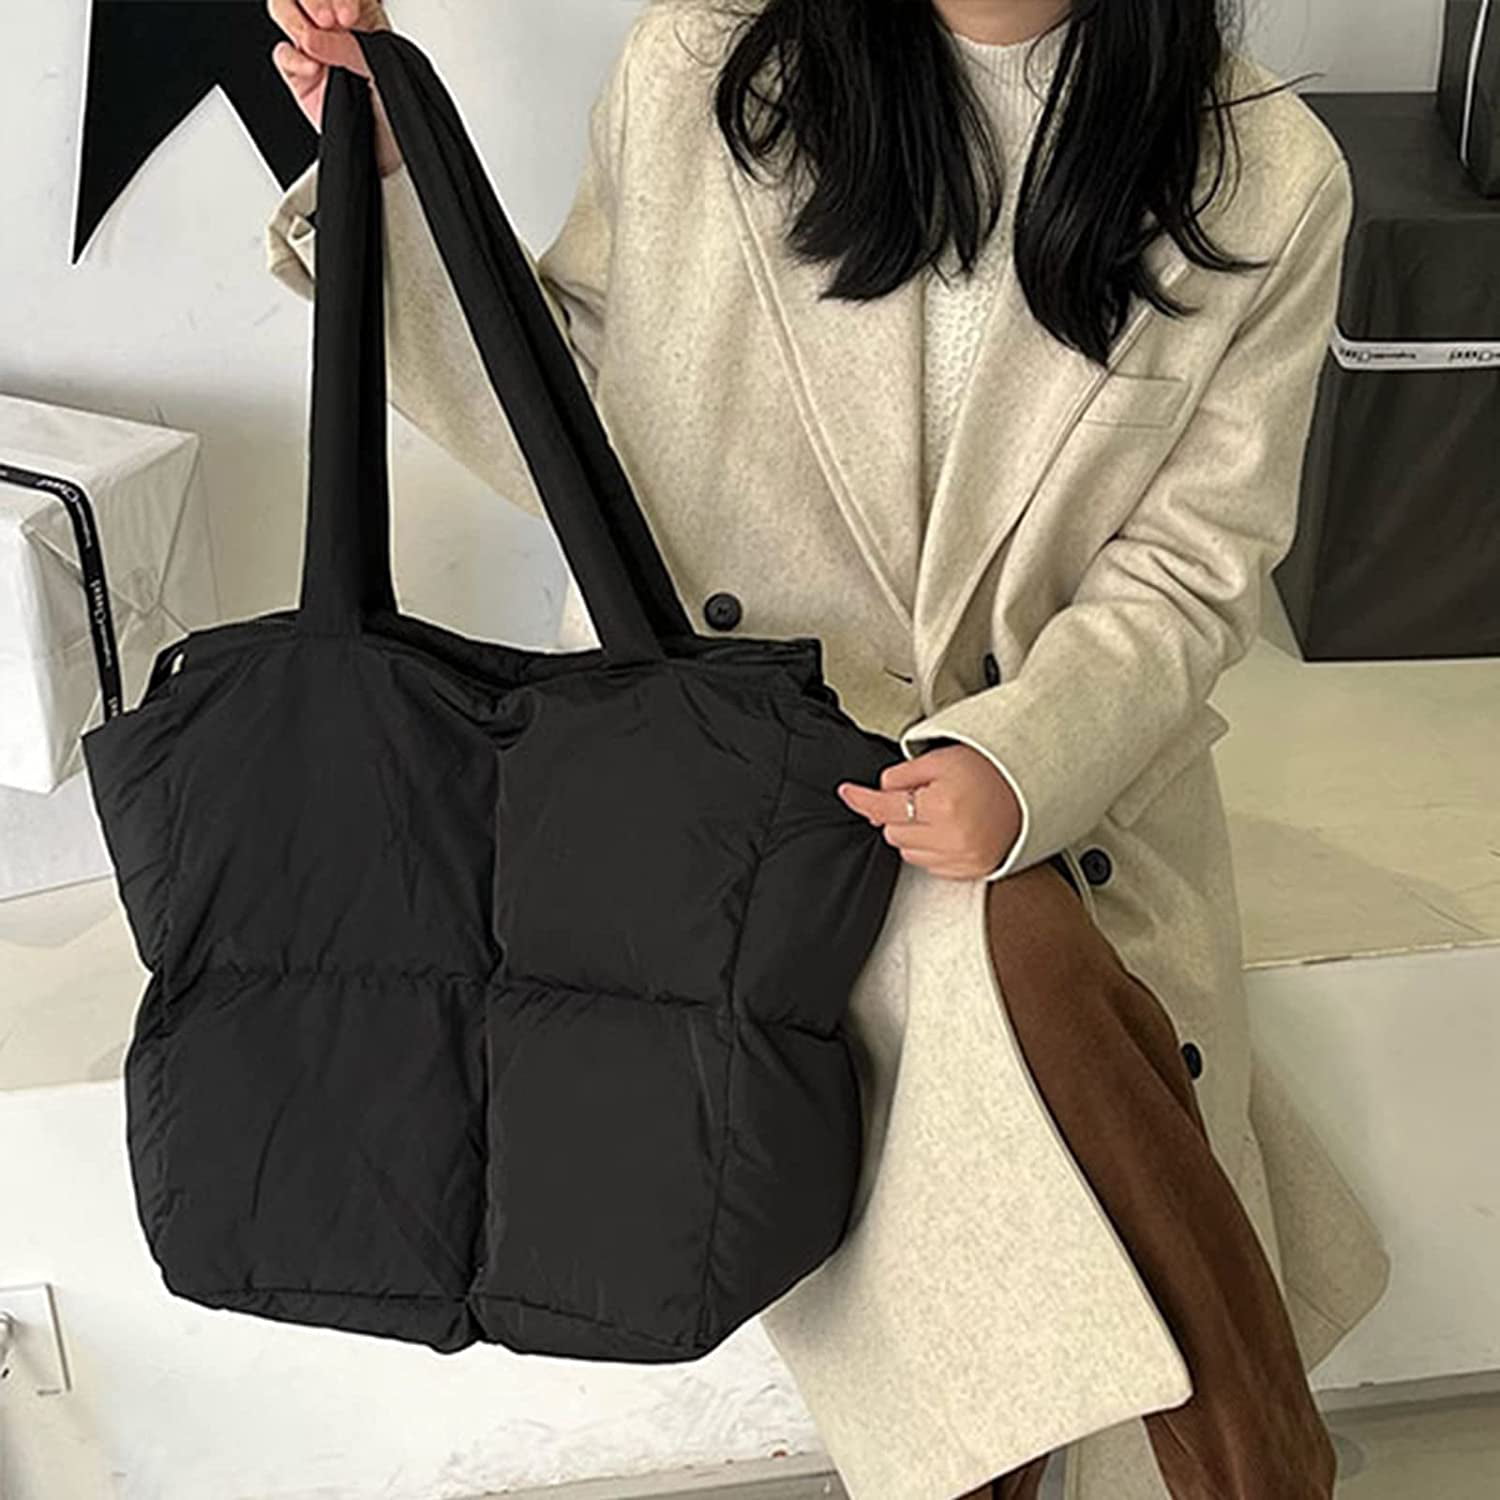  OWGSEE Puffer Tote Bag, Puffy Bags for Women Light Winter Down  Cotton Padded Quilted Tote Bag Shoulder Handbags Purse (Beige) : Clothing,  Shoes & Jewelry